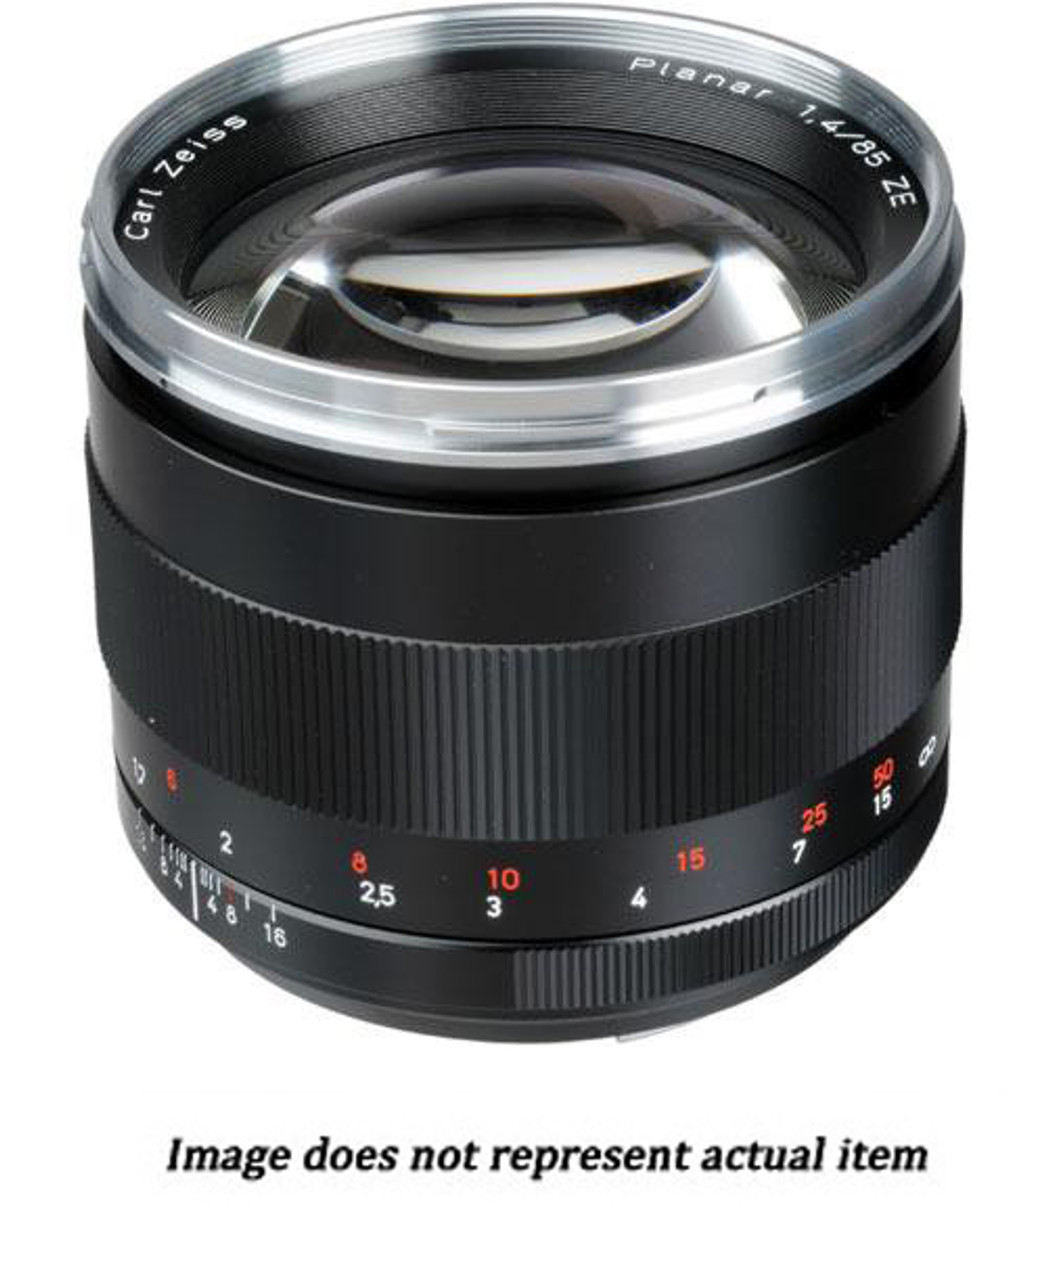 85mm f/1.4 ZE Planar T* Manual Focus Lens for Canon (USED) - S/N